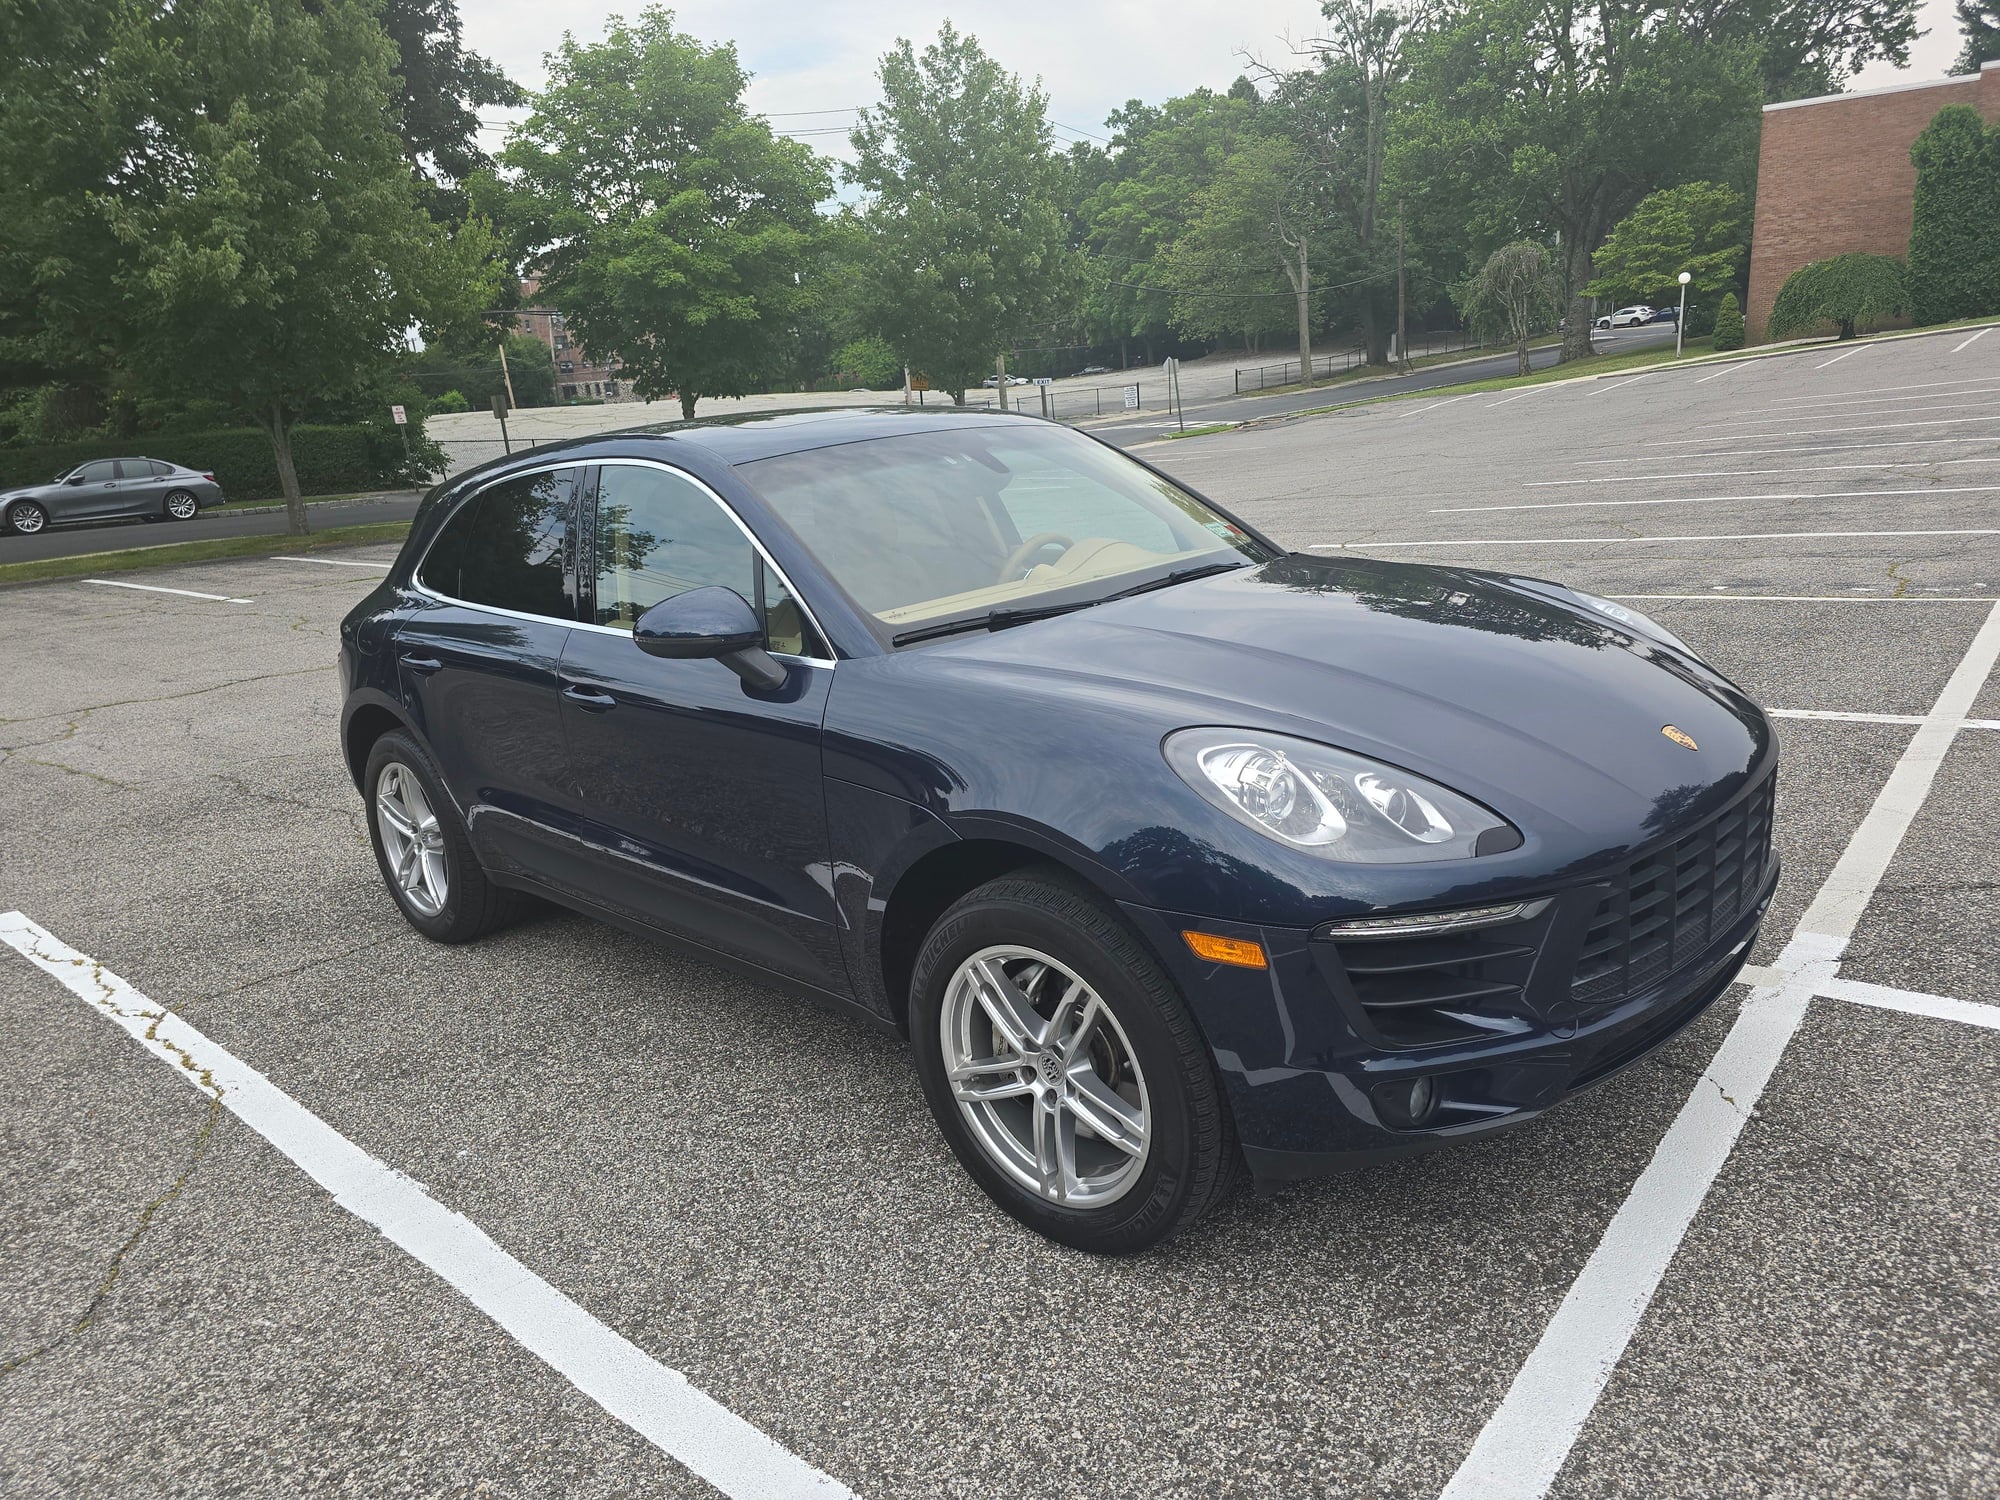 2015 Porsche Macan - 2015 Macan S One Owner Clean - Used - VIN WP1AB2A55FLB70266 - 69,700 Miles - 6 cyl - AWD - Automatic - SUV - Blue - Larchmont, NY 10538, United States